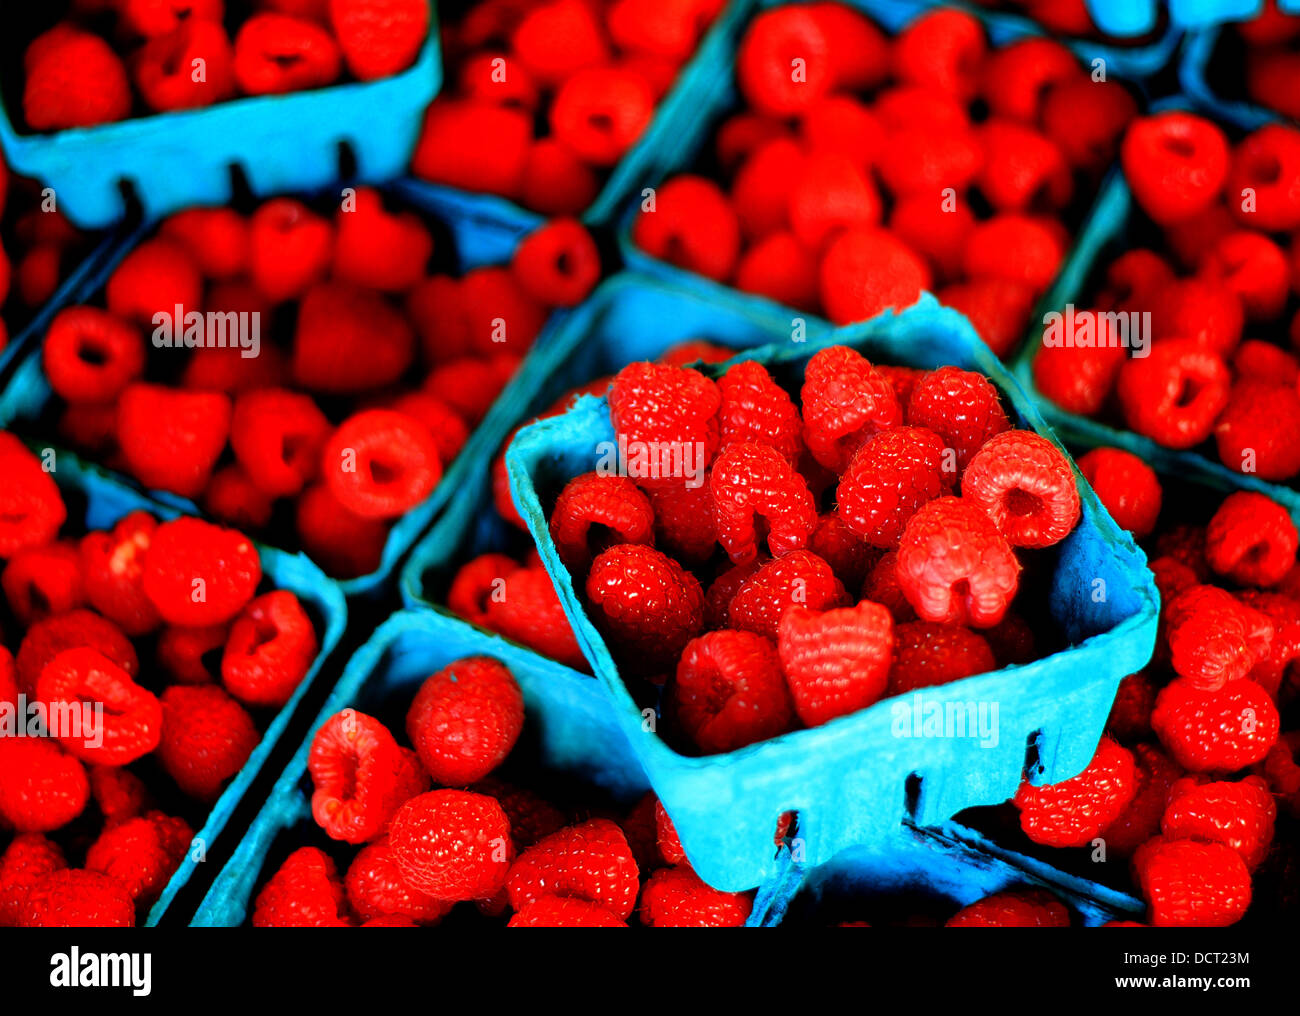 Plump berries in bins on display for sale at the market Stock Photo